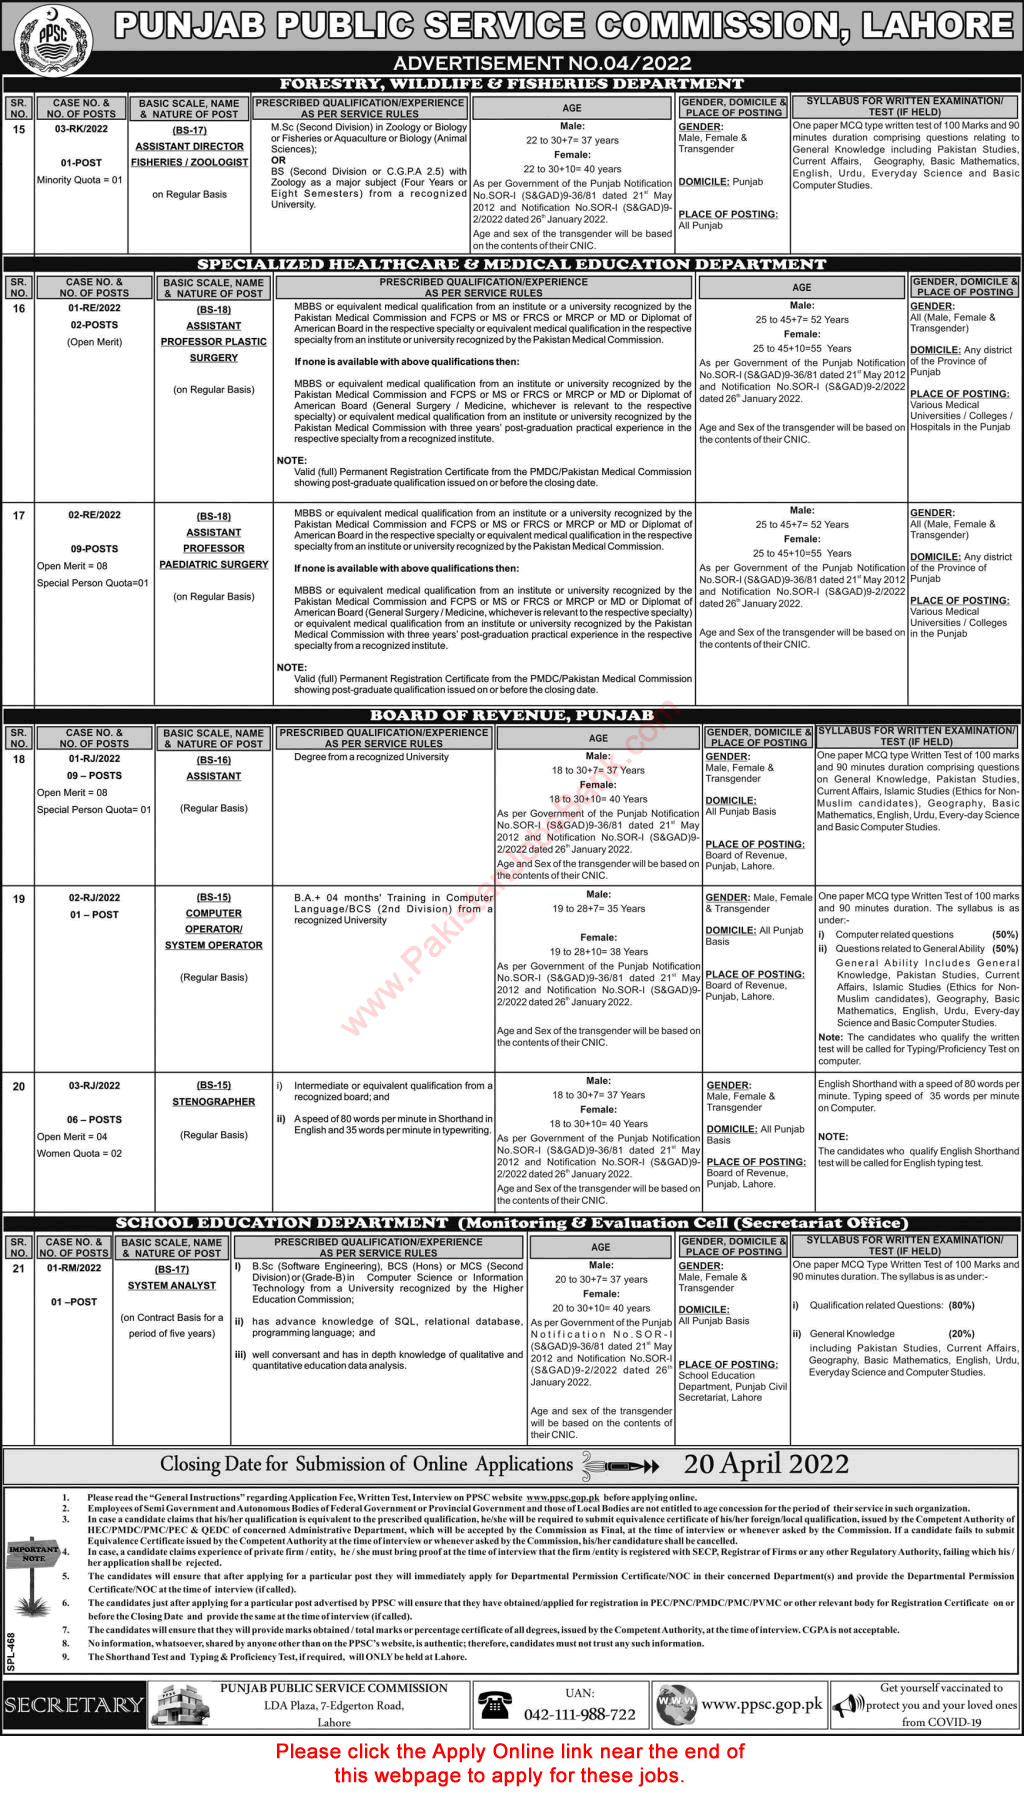 PPSC Jobs April 2022 Apply Online Consolidated Advertisement No 04/2022 4/2022 Latest